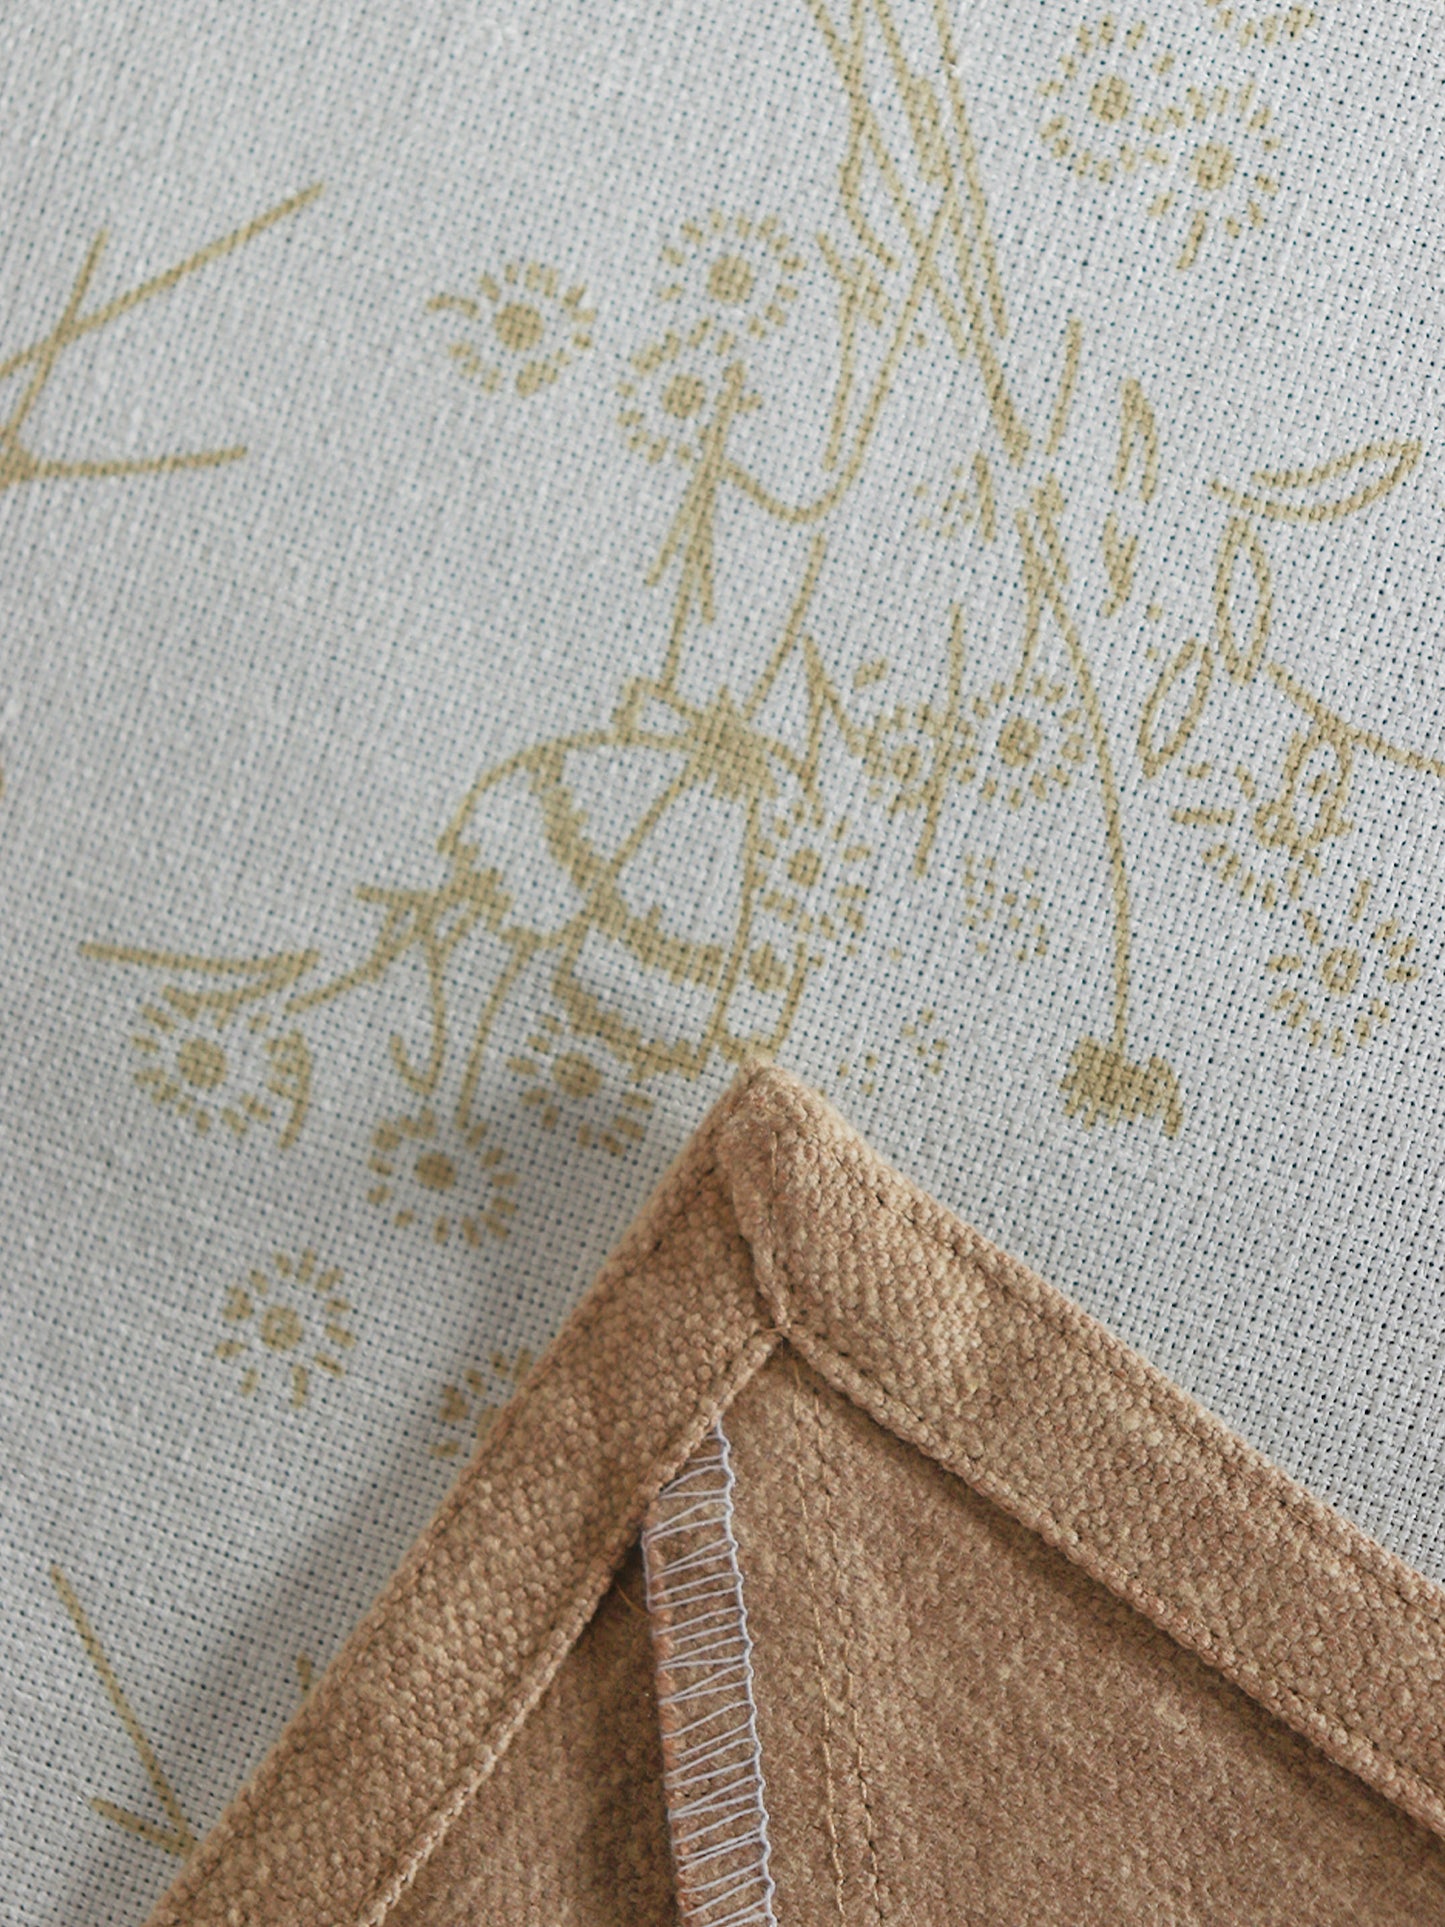 Table Cover with Panel Border and  Self Textured Floral Pattern | Cotton Blend - Off White and Gold - 52in x 84in